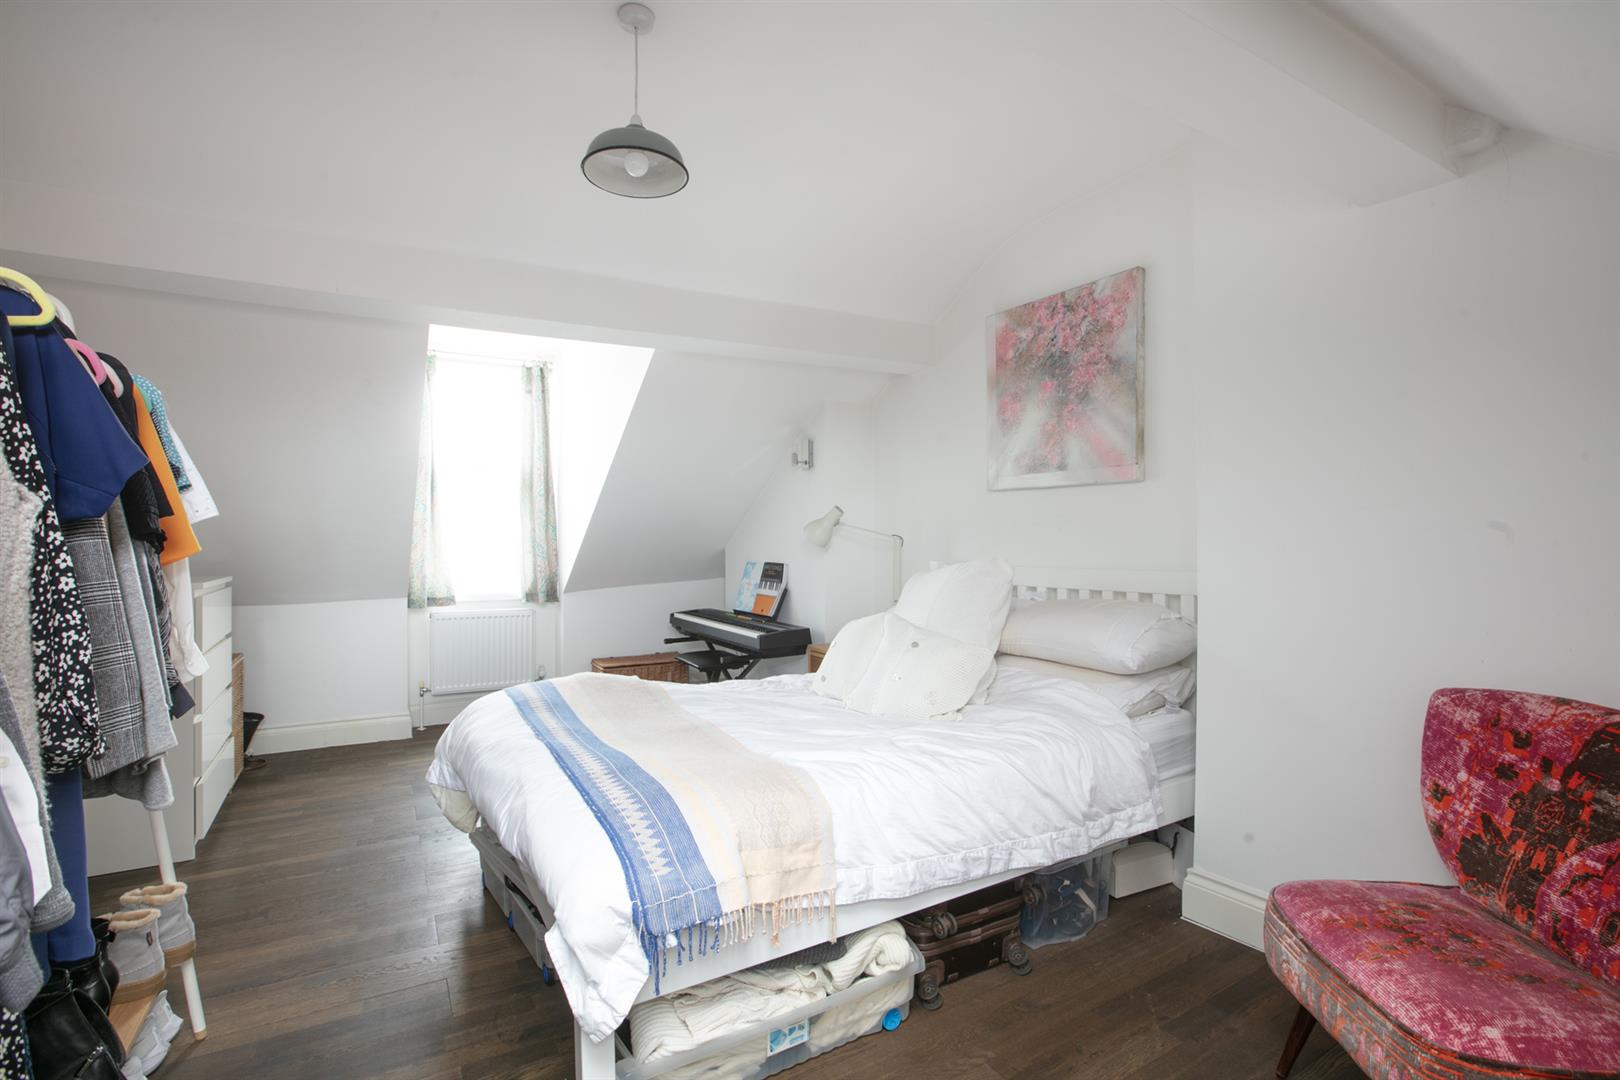 Flat - Conversion For Sale in Coldharbour Lane, Camberwell, SE5 1178 view12